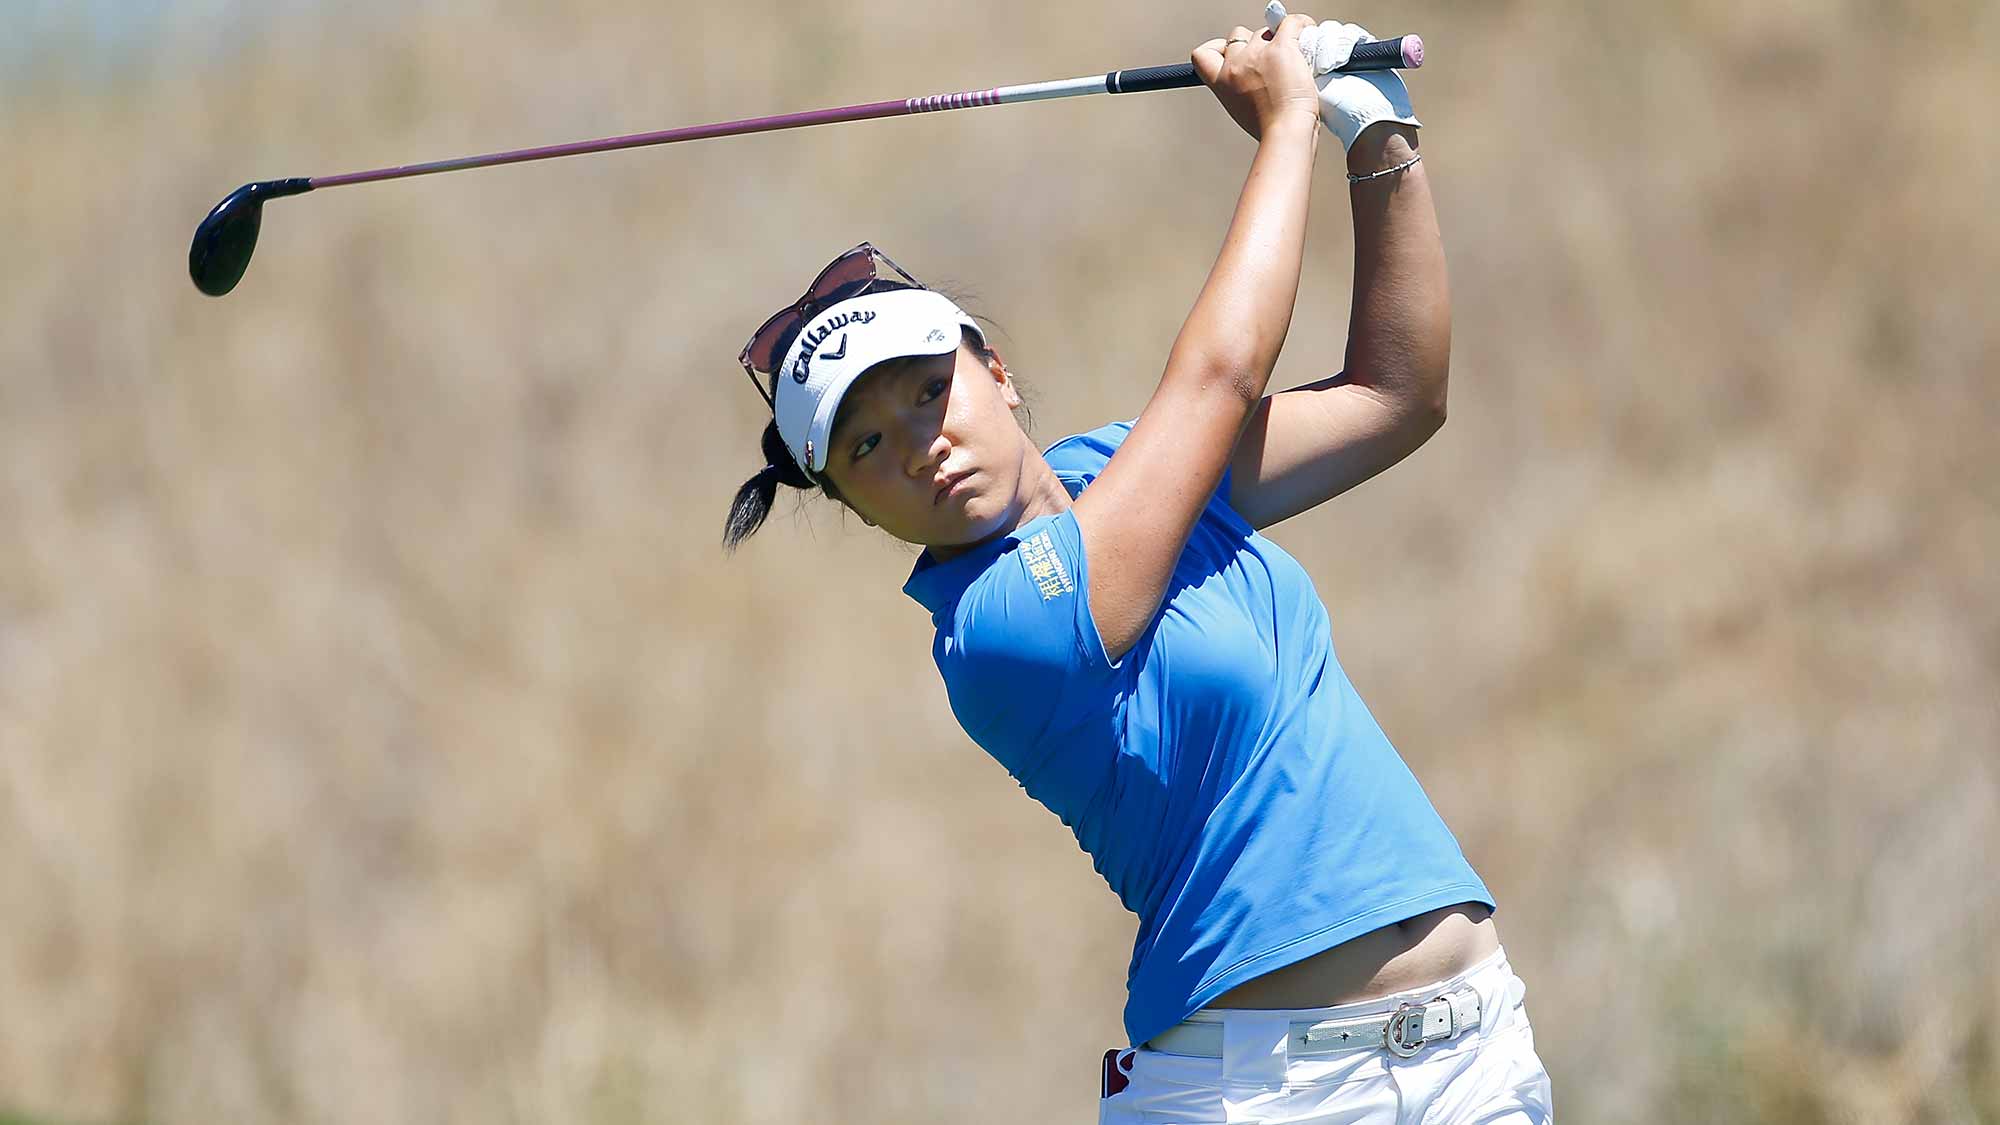 Lydia Ko during the third round of the U.S. Women's Open at CordeValle Golf Club